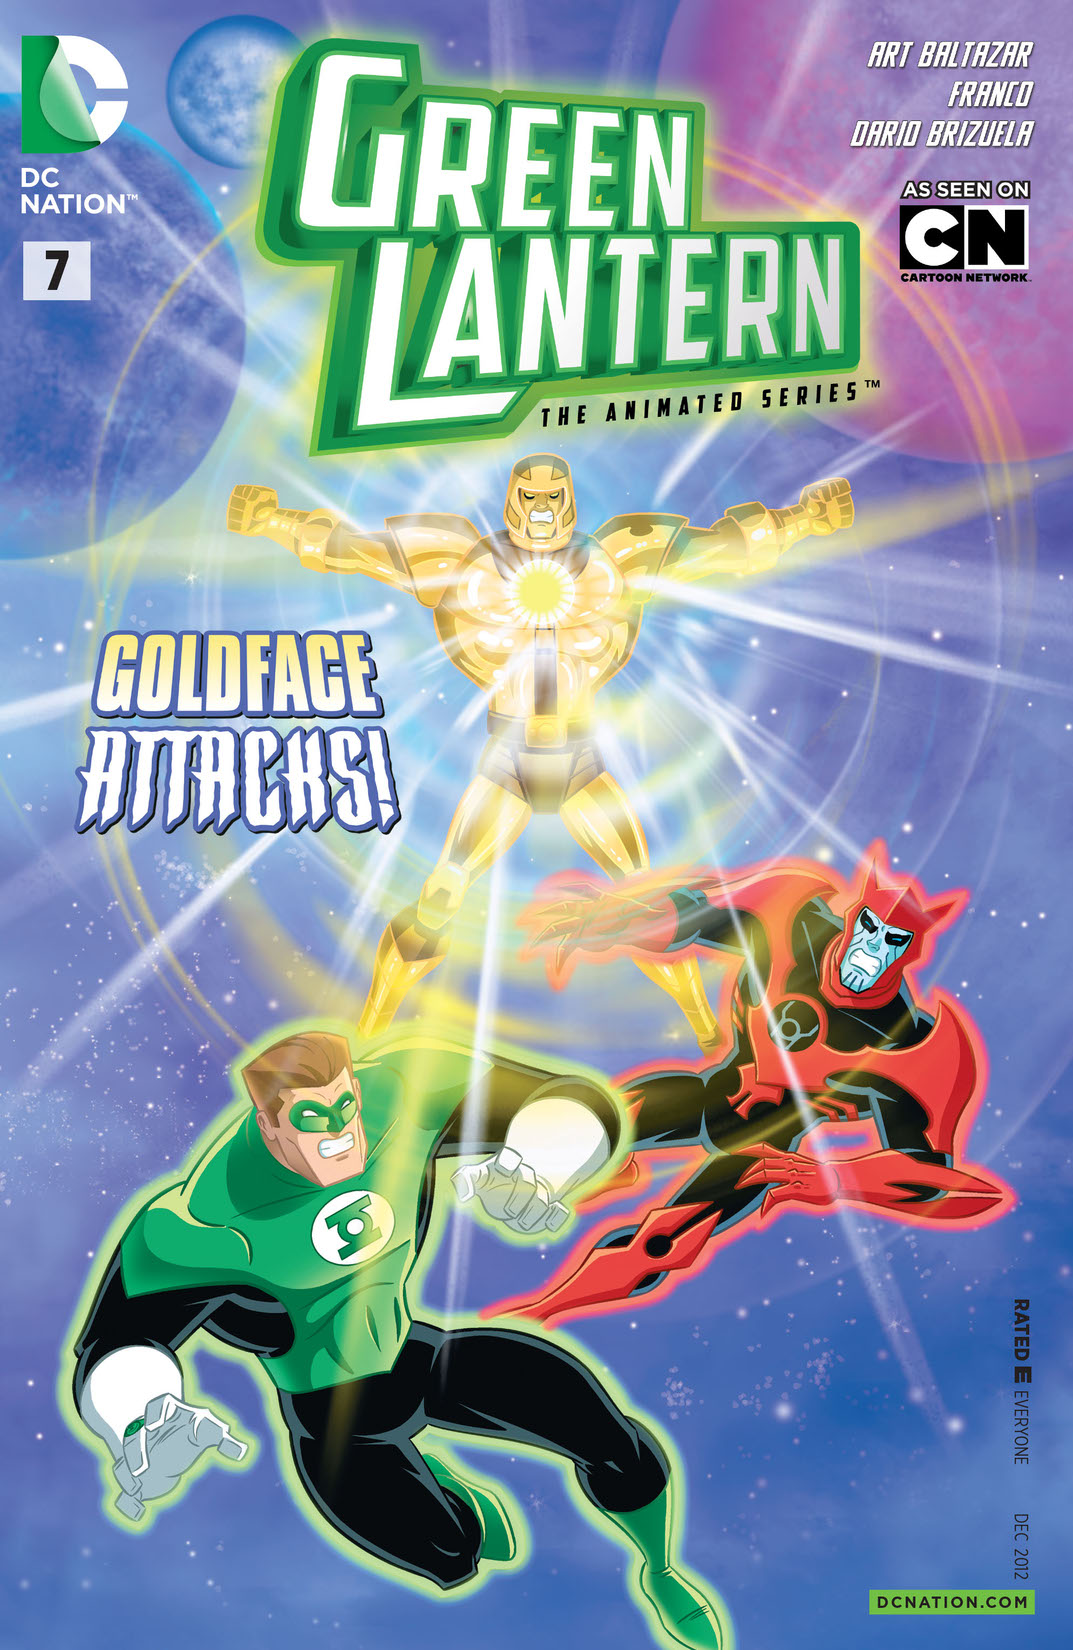 Green Lantern: The Animated Series #7 preview images